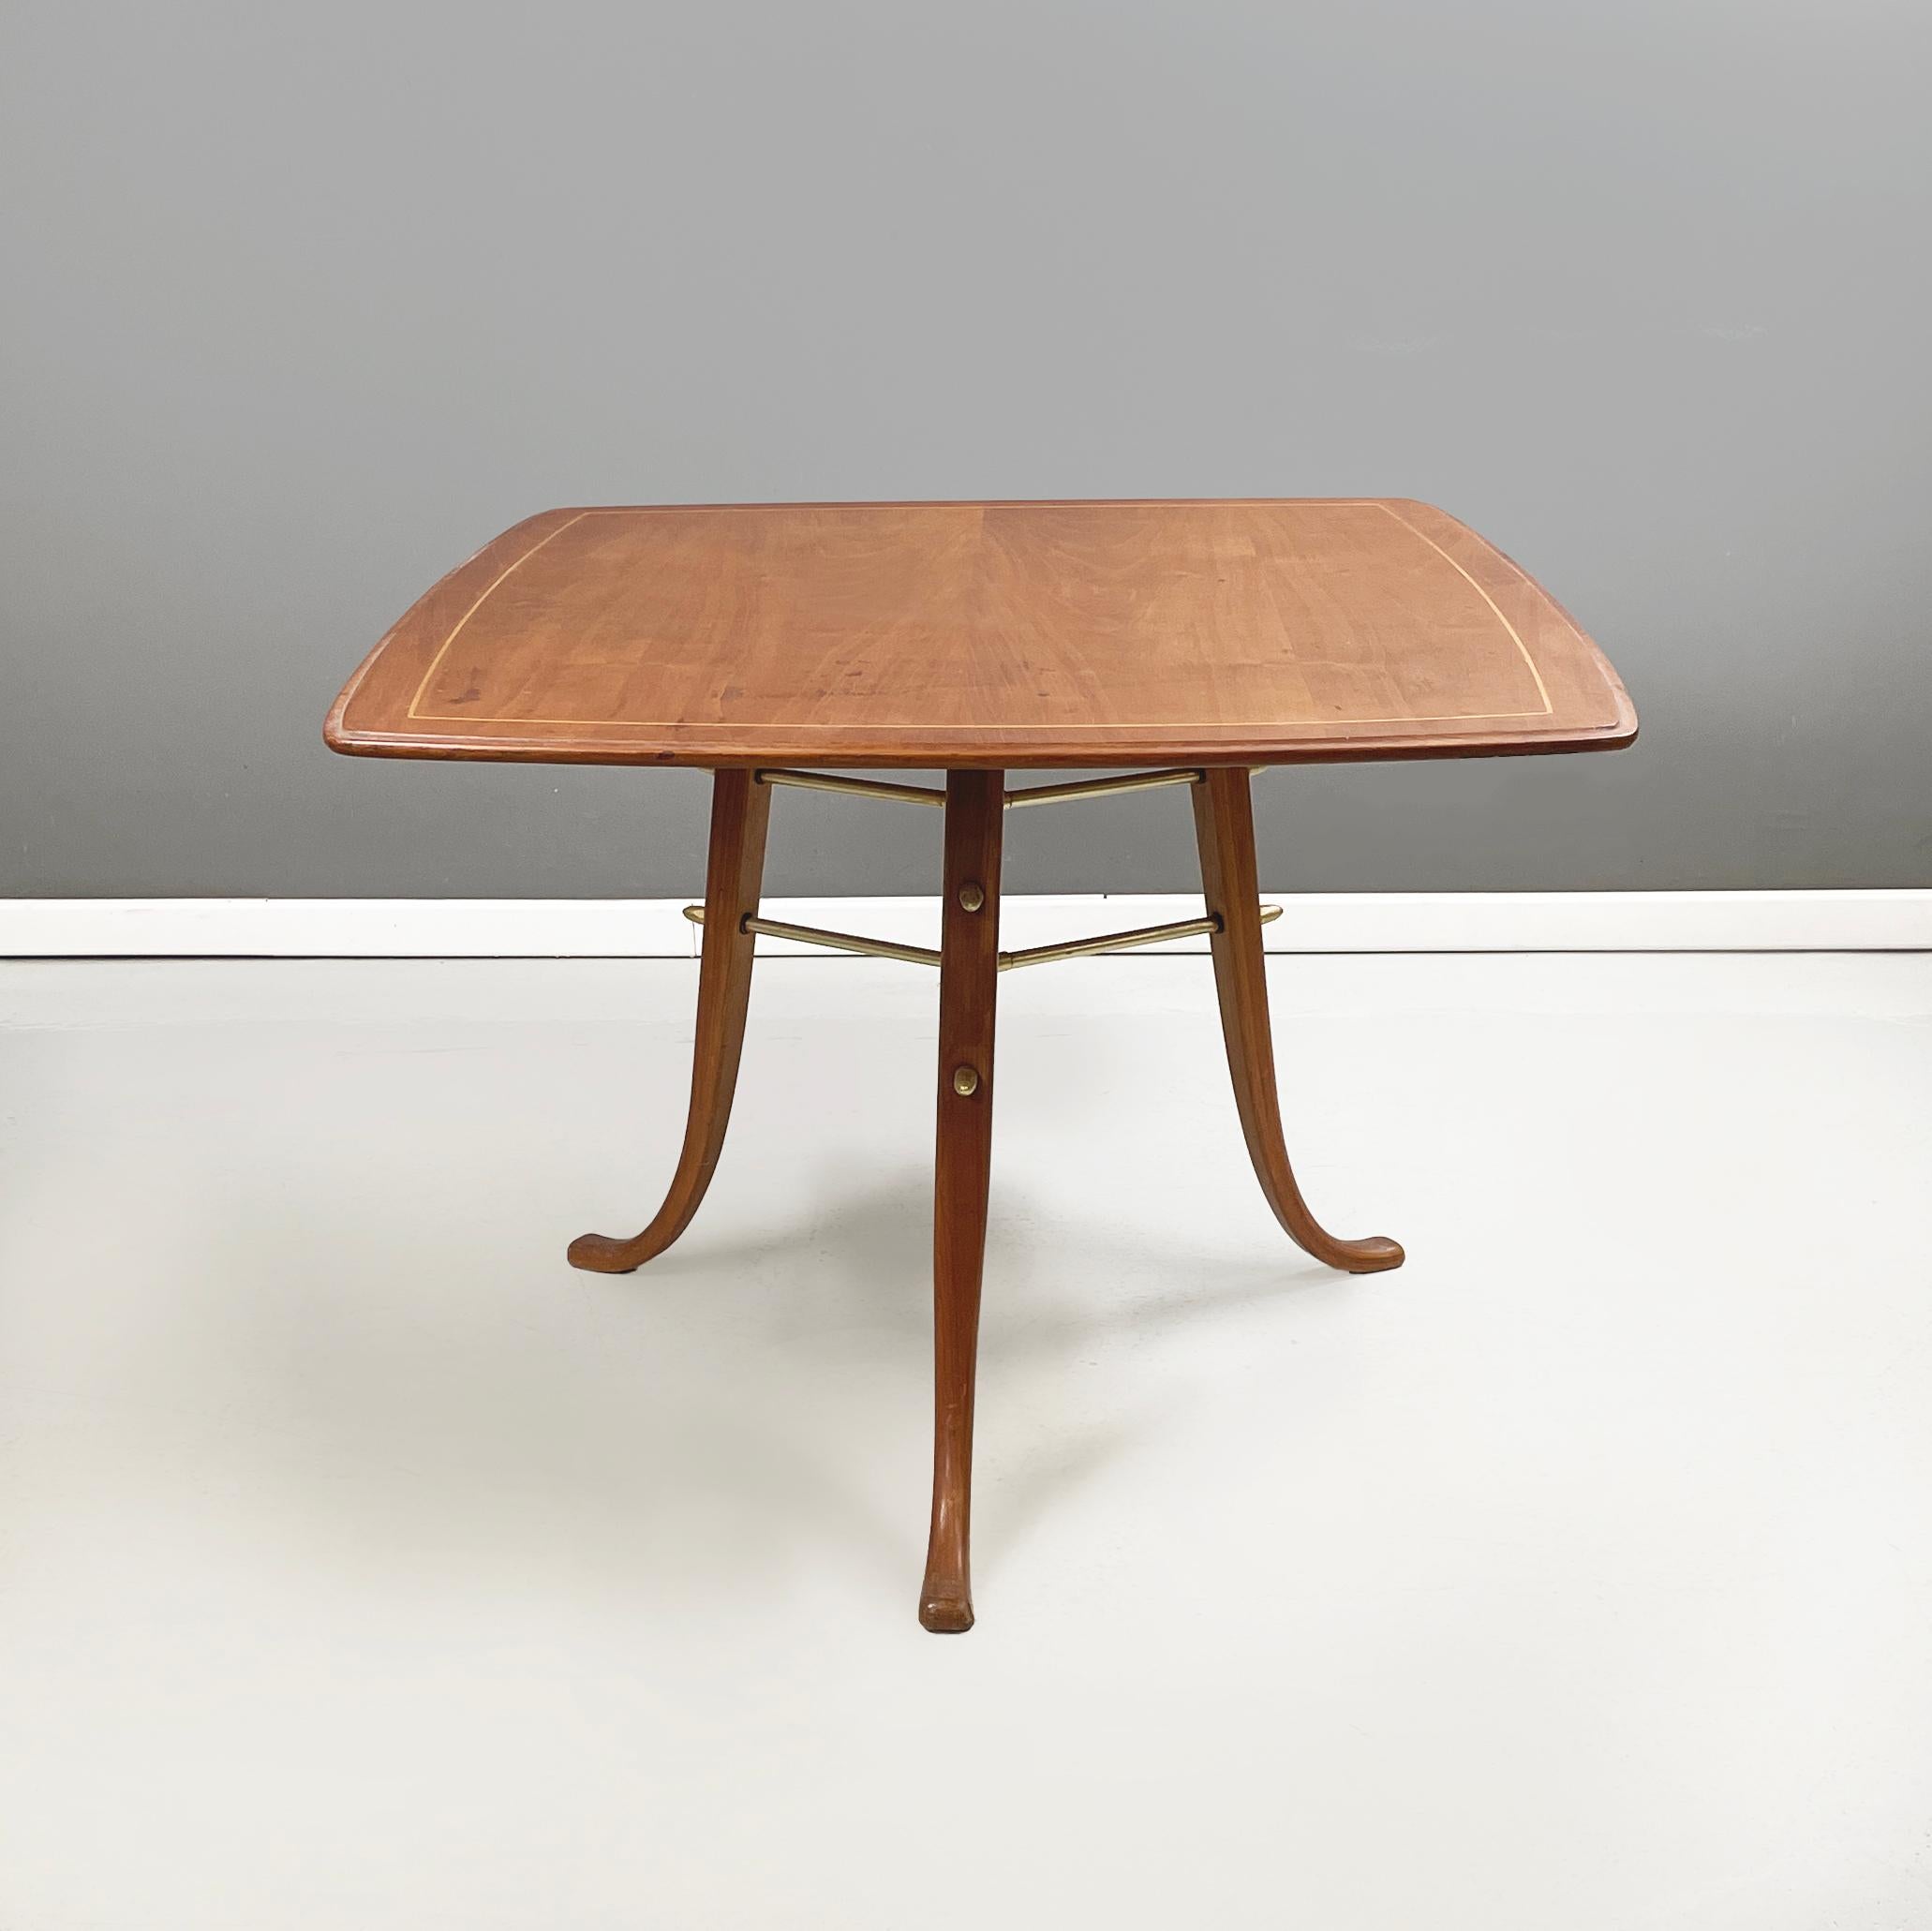 North European mid-century modern Squared coffee table in wood and brass, 1960s
Coffee table with rectangular top with rounded wooden corners, with light wood detail on the profile. The three round wooden legs are joined in the center by a brass